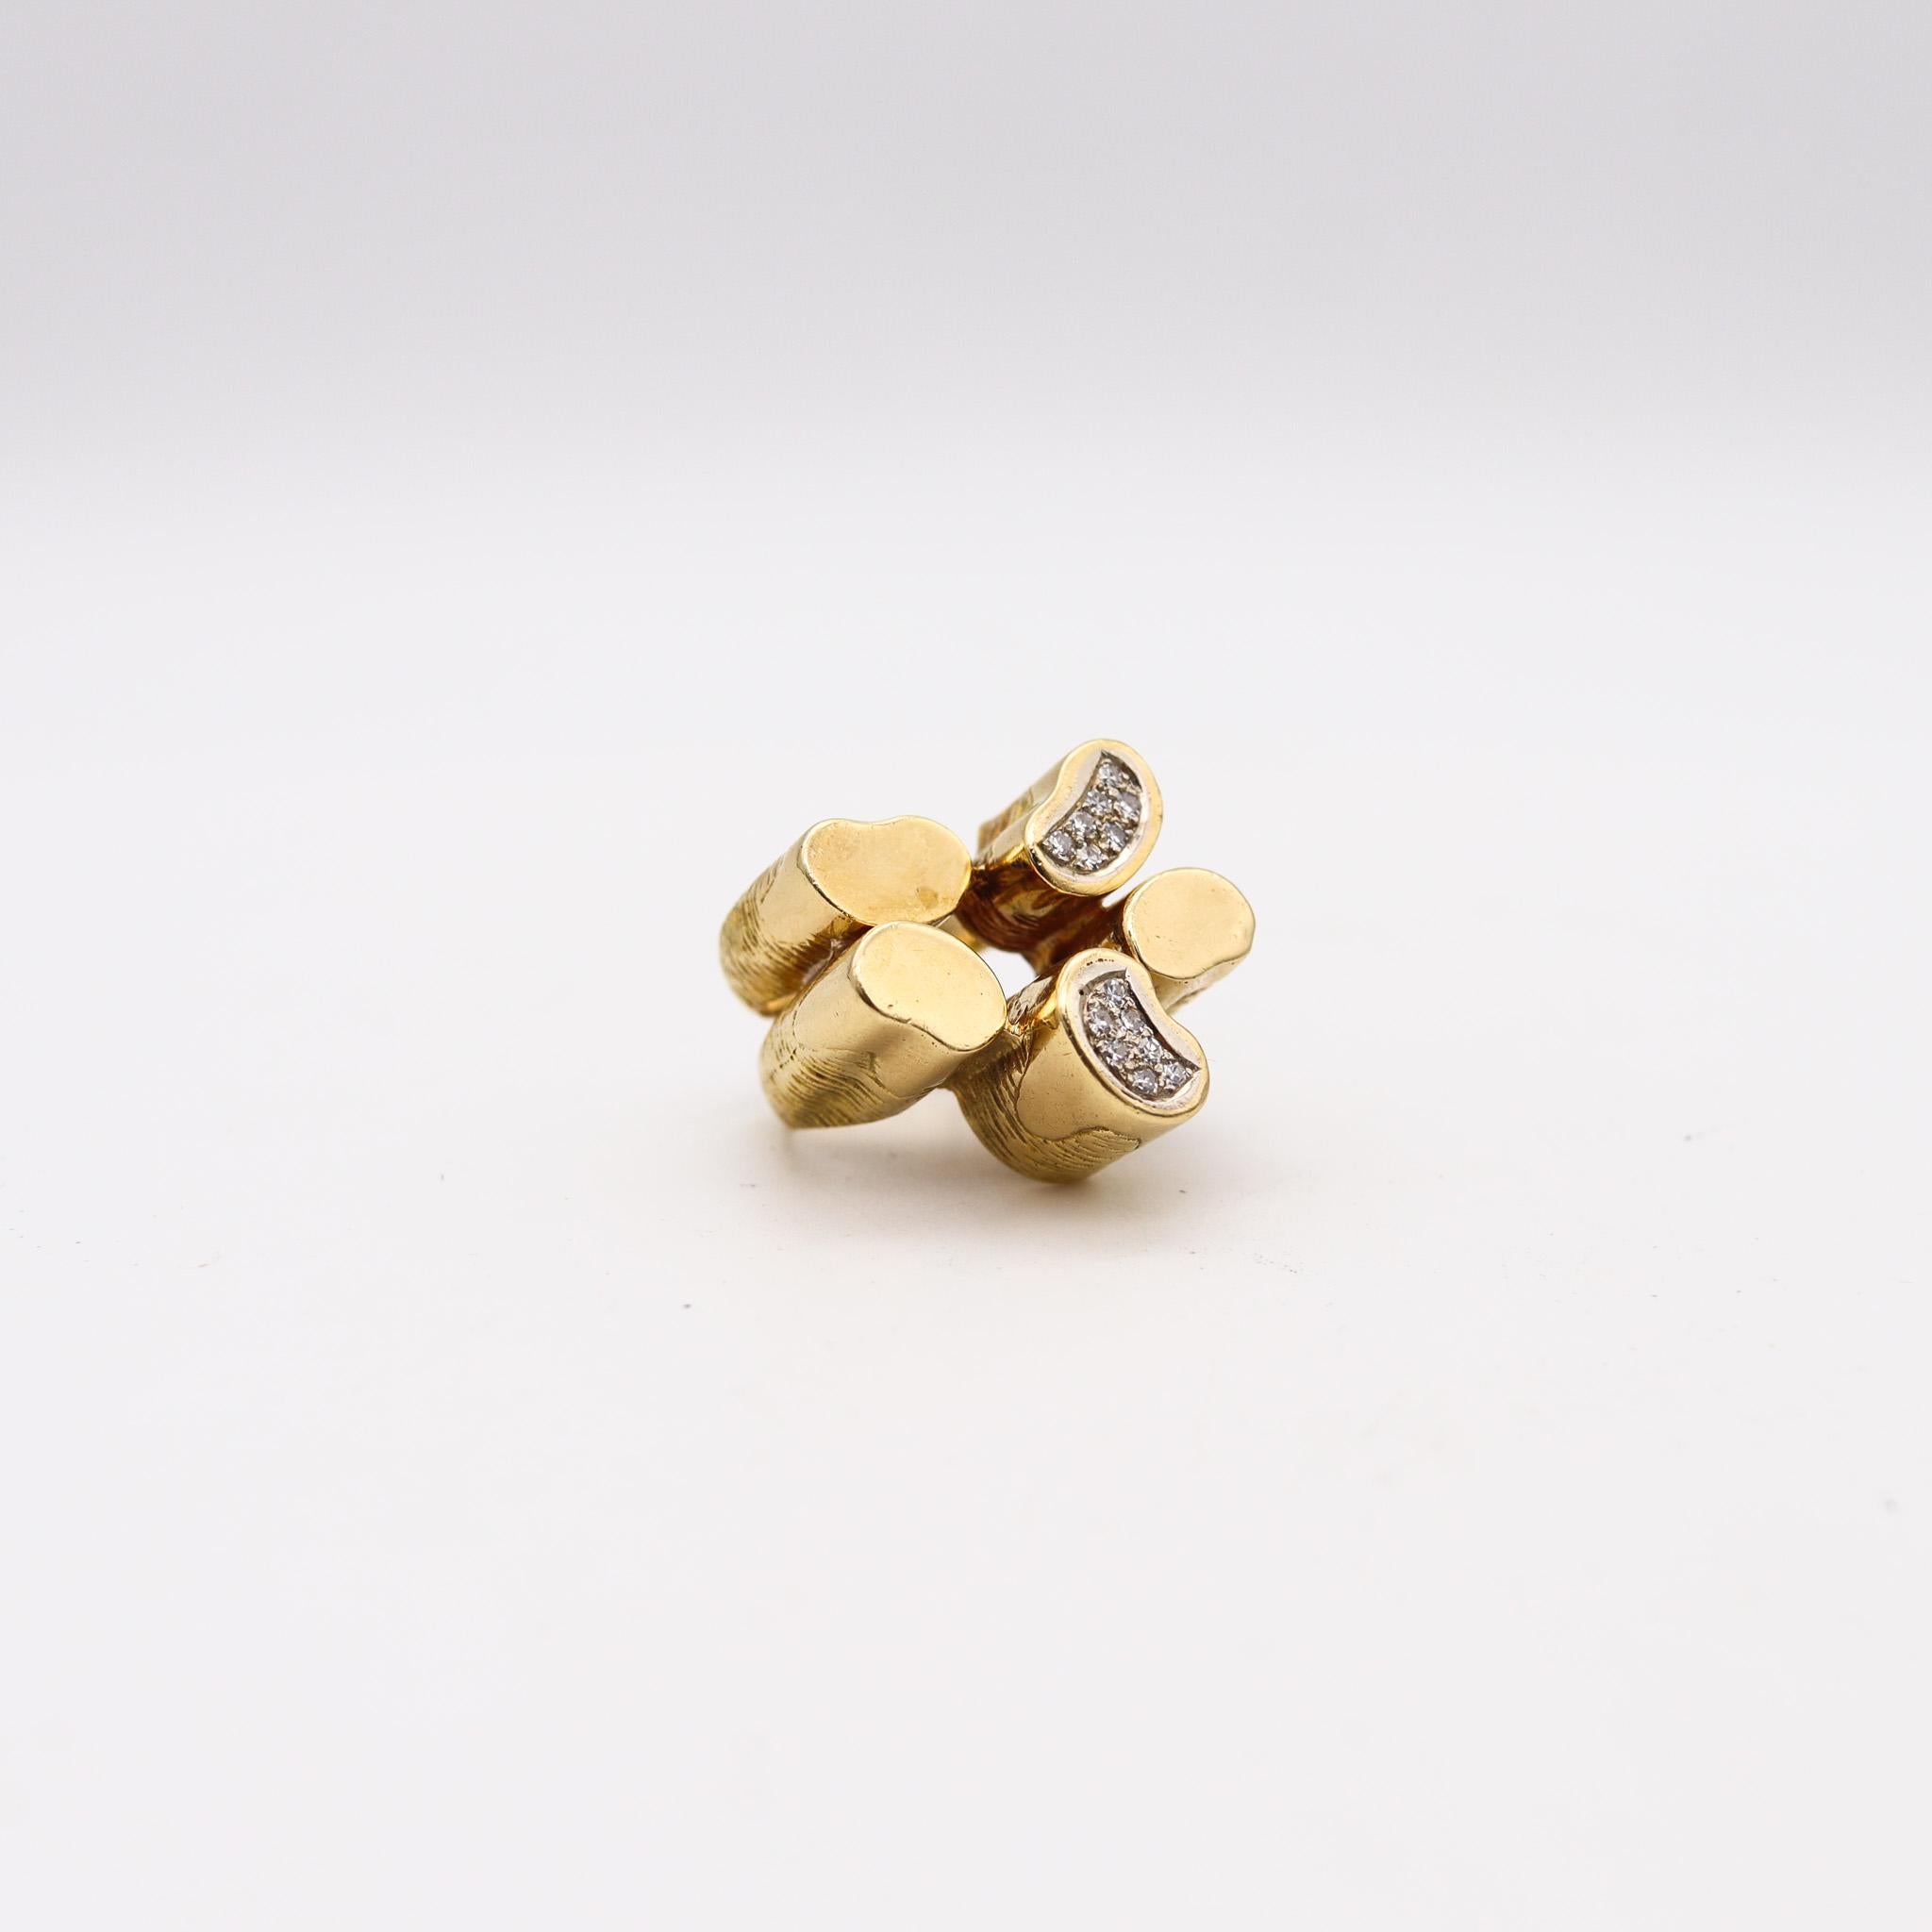 Brilliant Cut Italian Modernist 1970 Concretism Sculptural Ring In 18Kt Yellow Gold & Diamonds